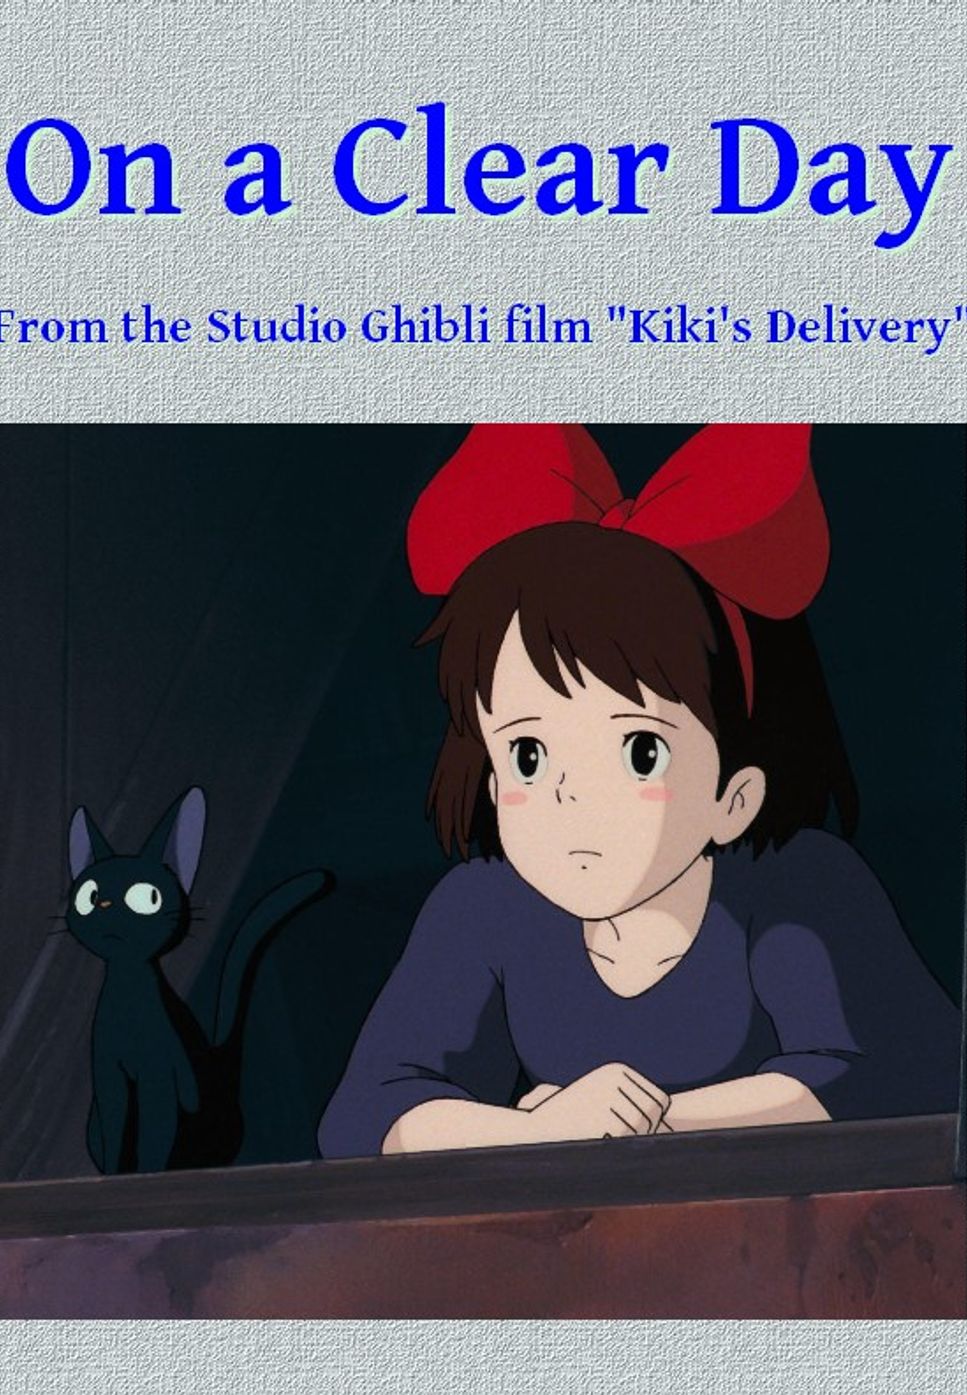 Kiki's Delivery Service - On a Clear Day (Piano Solo) by O. Guy Morley